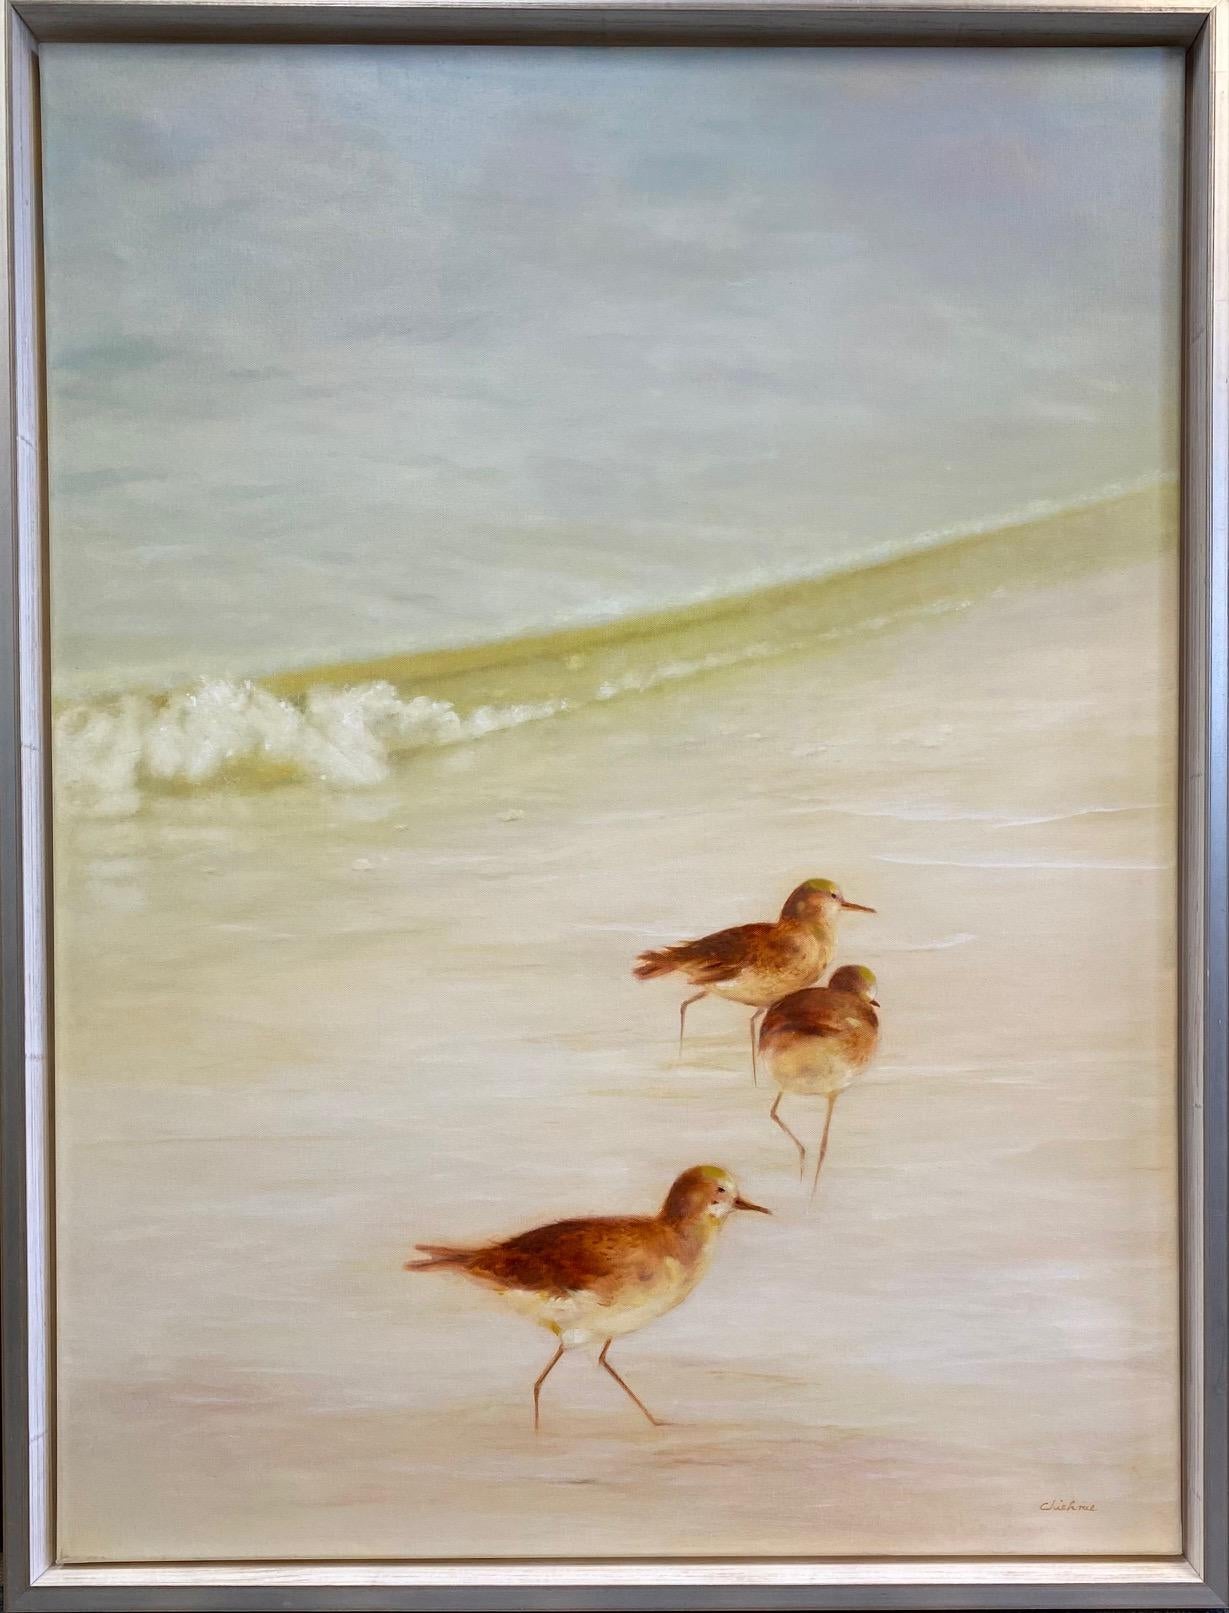 Chieh-Nie Cherng Animal Painting - Sandpipers, original 40x30 contemporary marine landscape